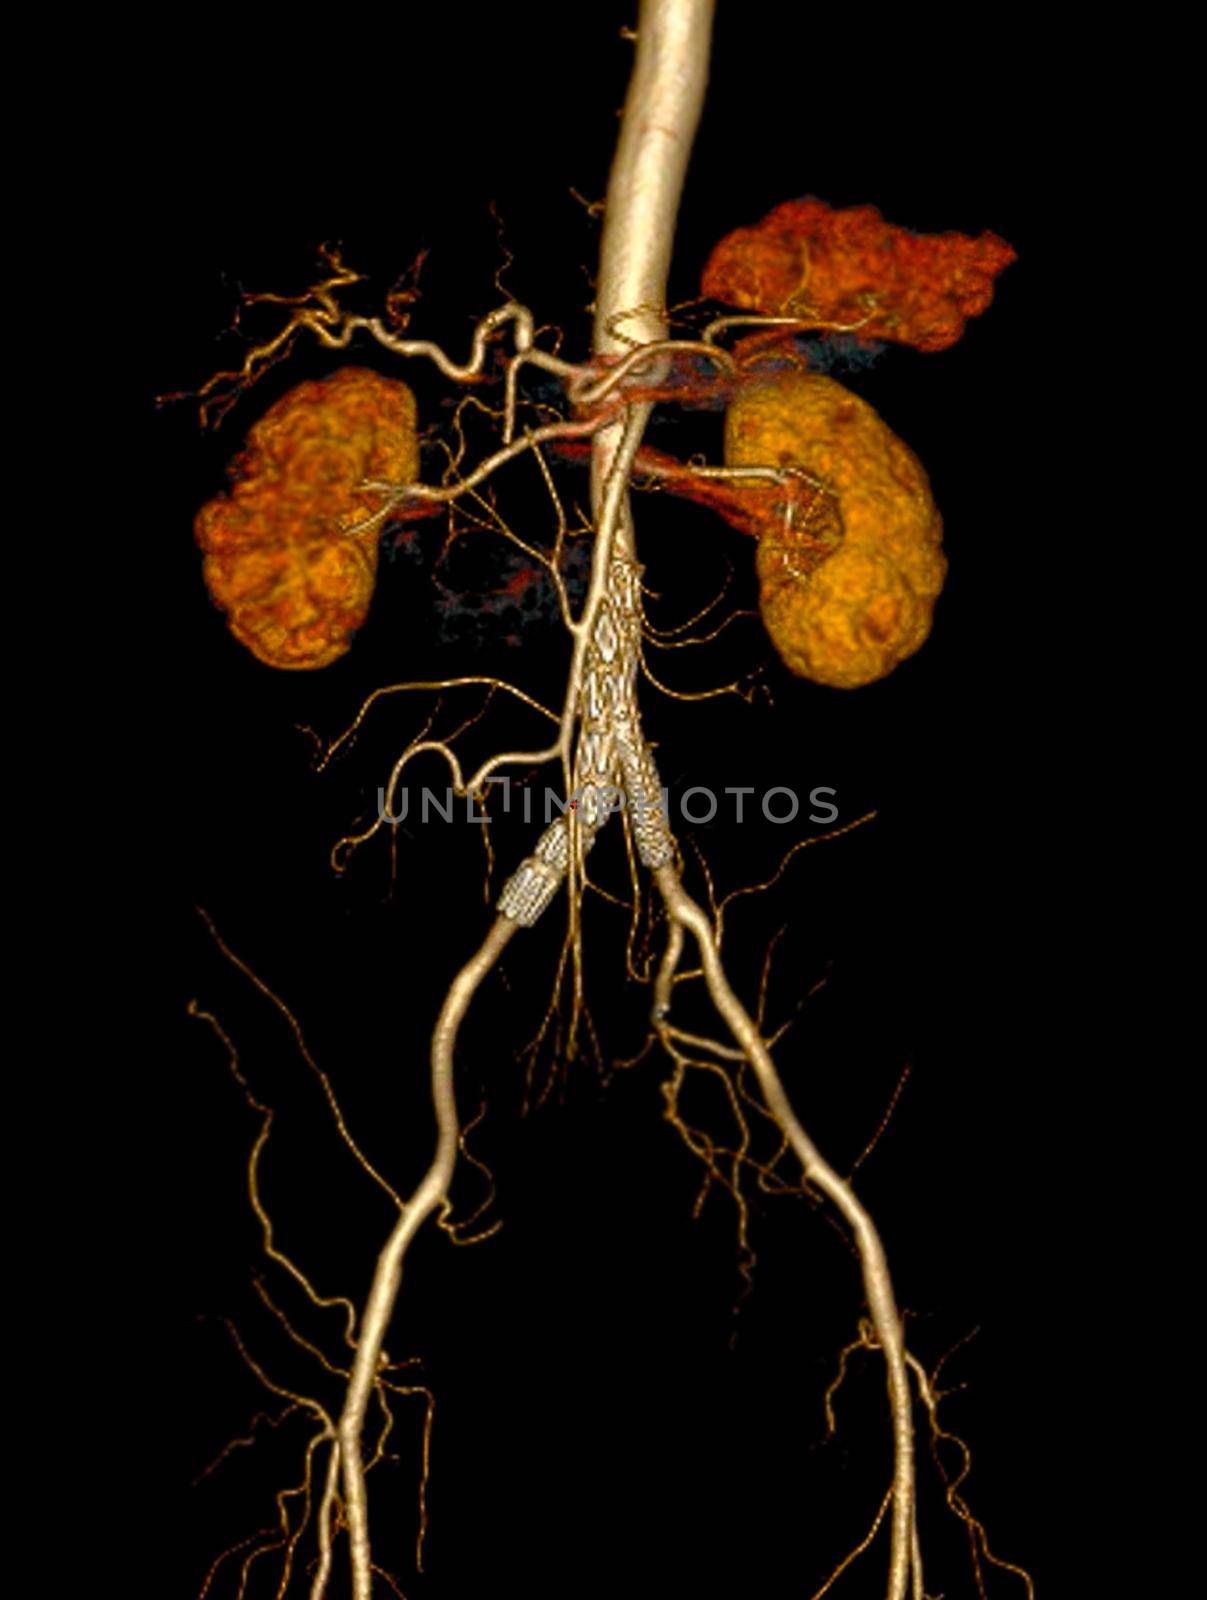 CTA Whole Aorta 3D rendering image by samunella